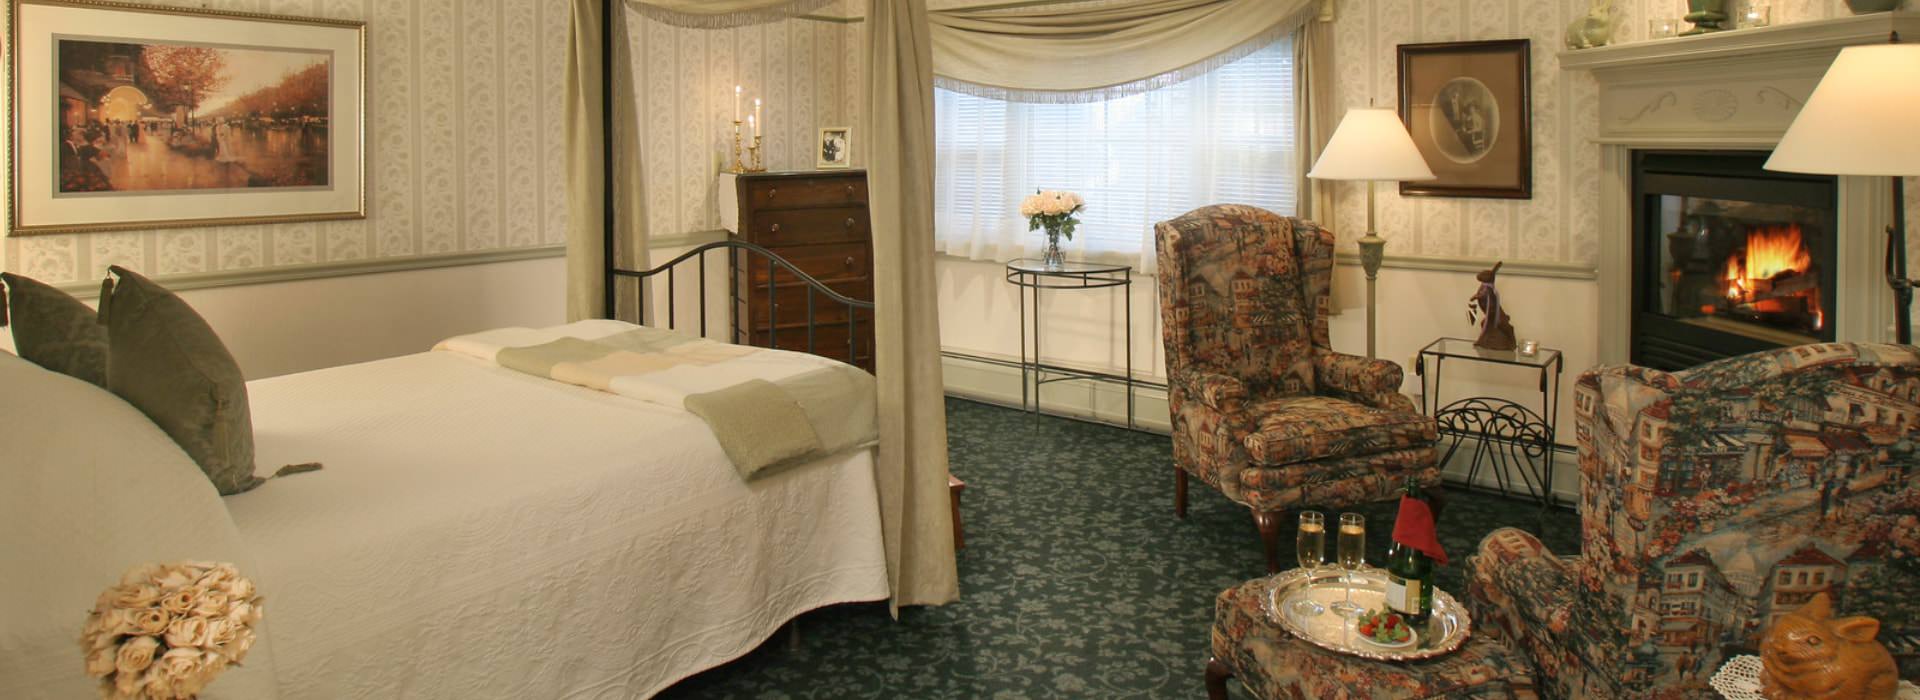 Large bedroom suite with wrought iron canopy bed, white bedding, dark green floral carpeting, sitting area, and fireplace